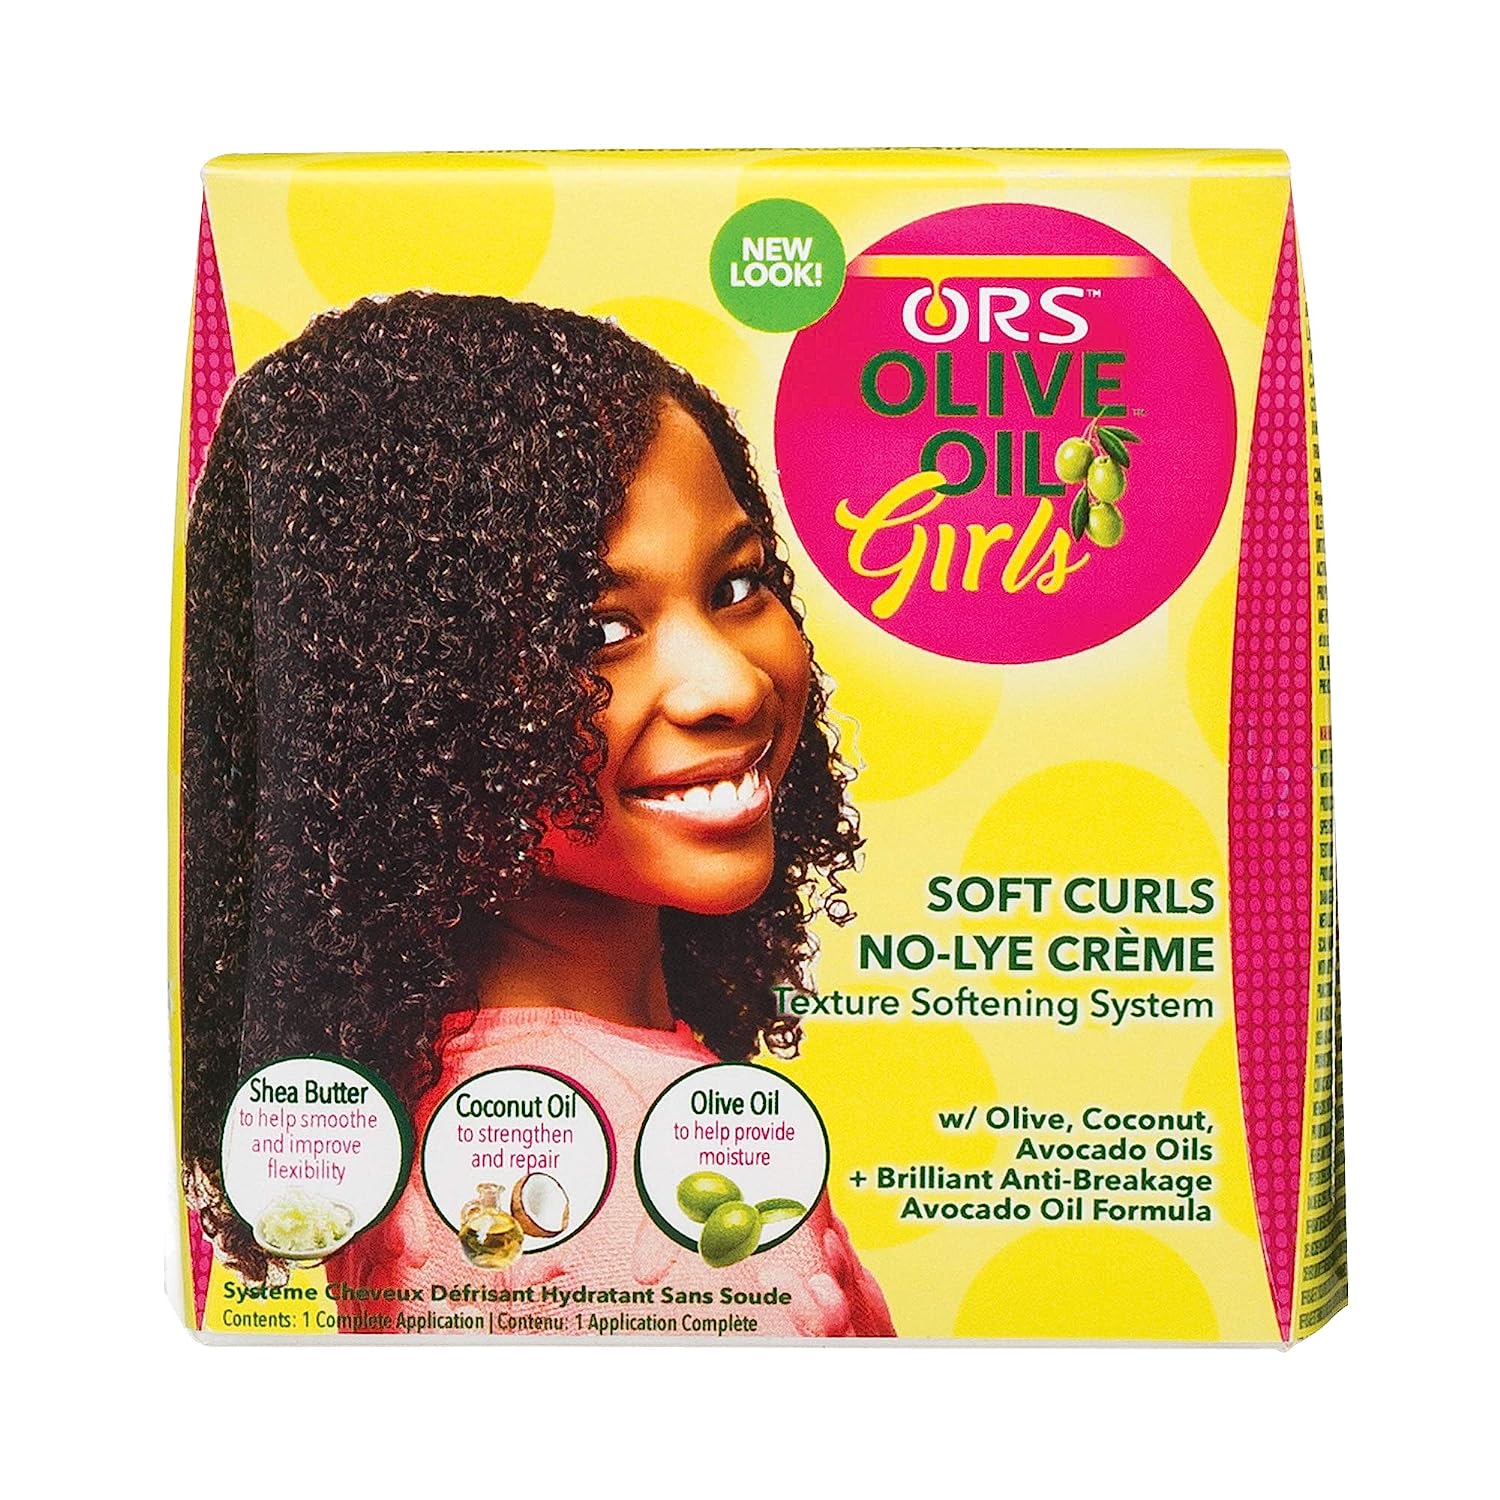 ORS Ors Olive Oil Girls Soft Curls No-lye Creme [...]